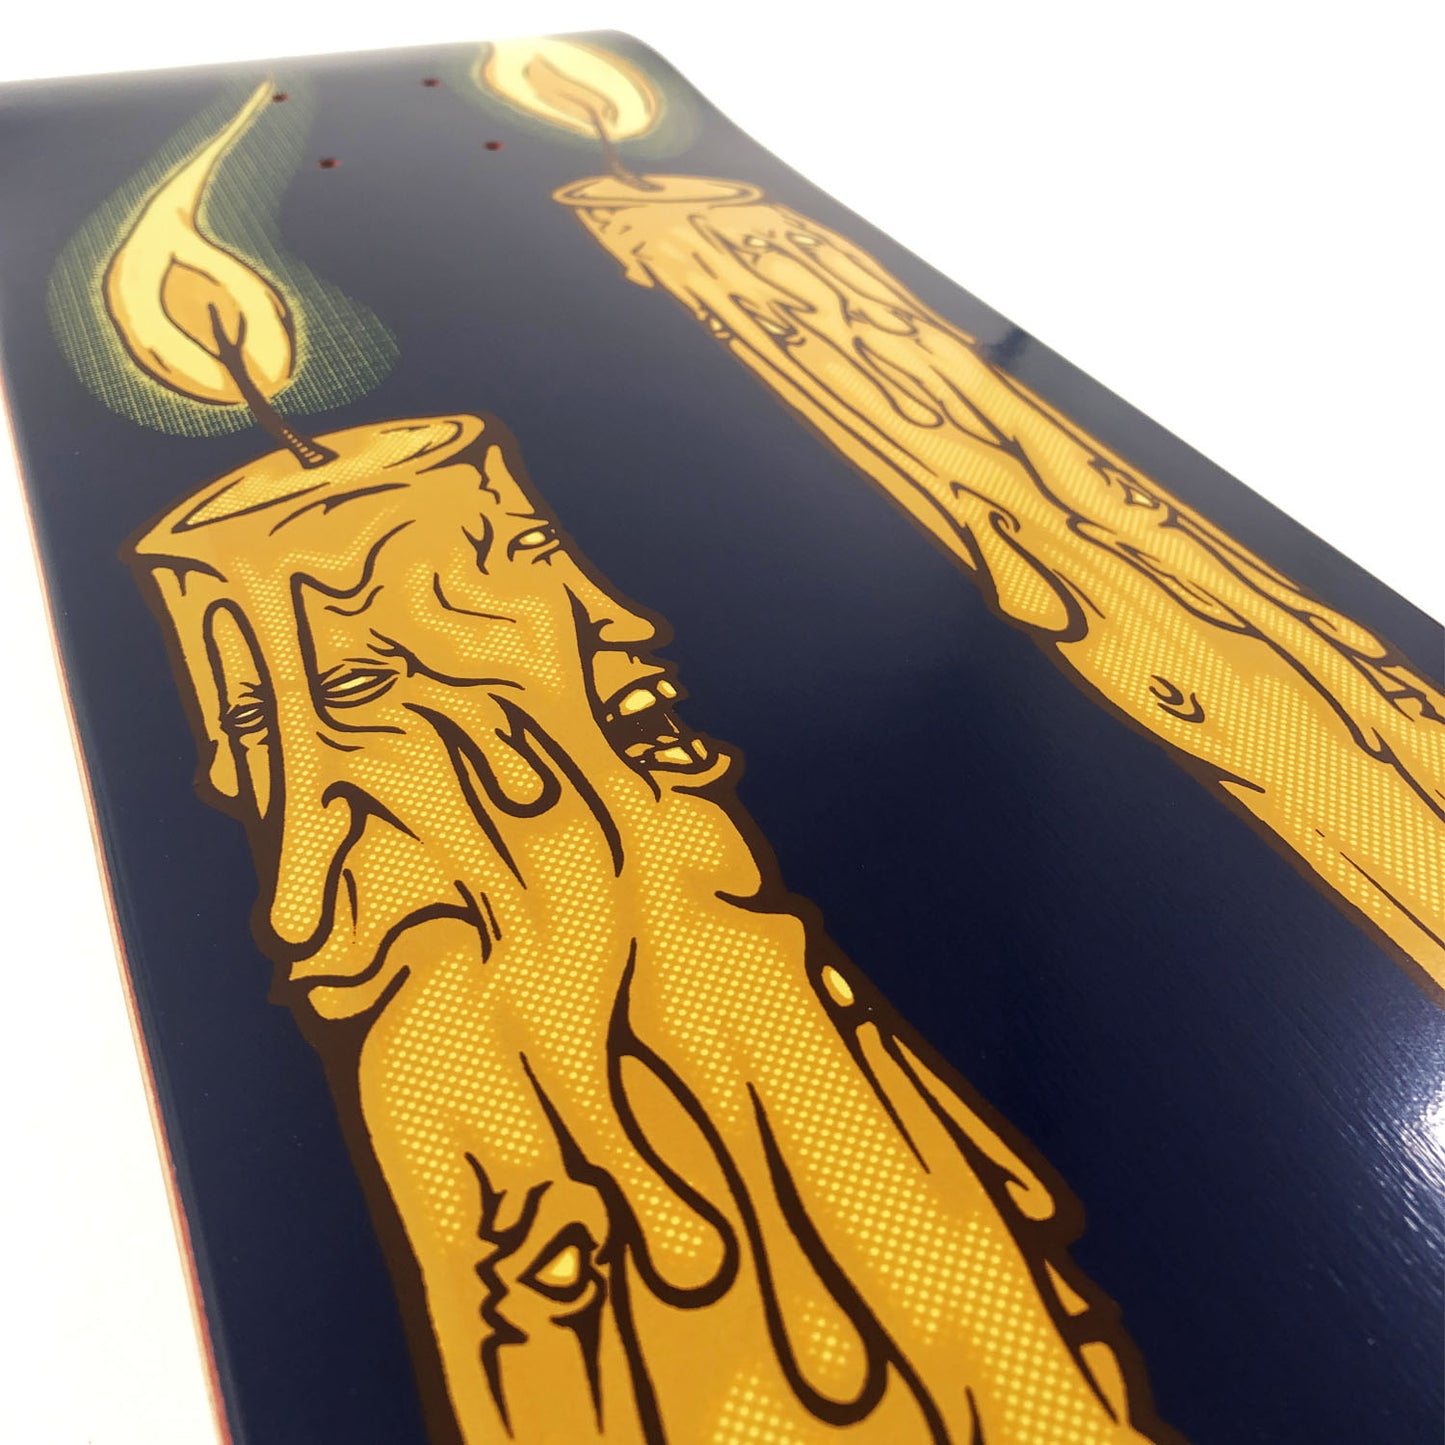 The Drawing Boards - 8.0" - Candle Deck - Prime Delux Store